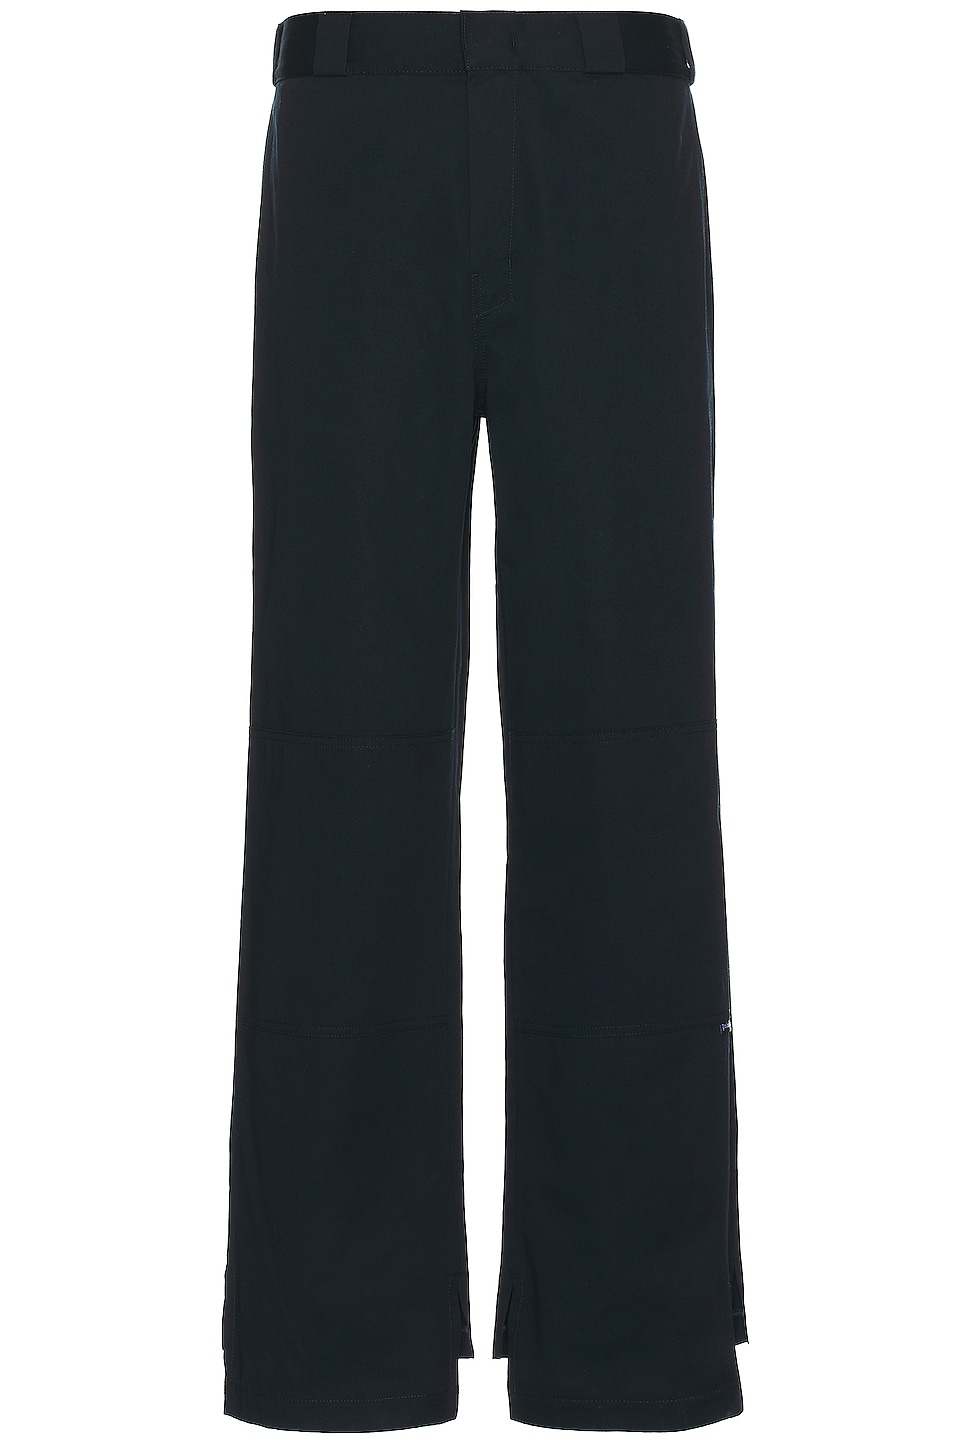 Image 1 of Palm Angels Sartorial Work Pants in Navy Blue